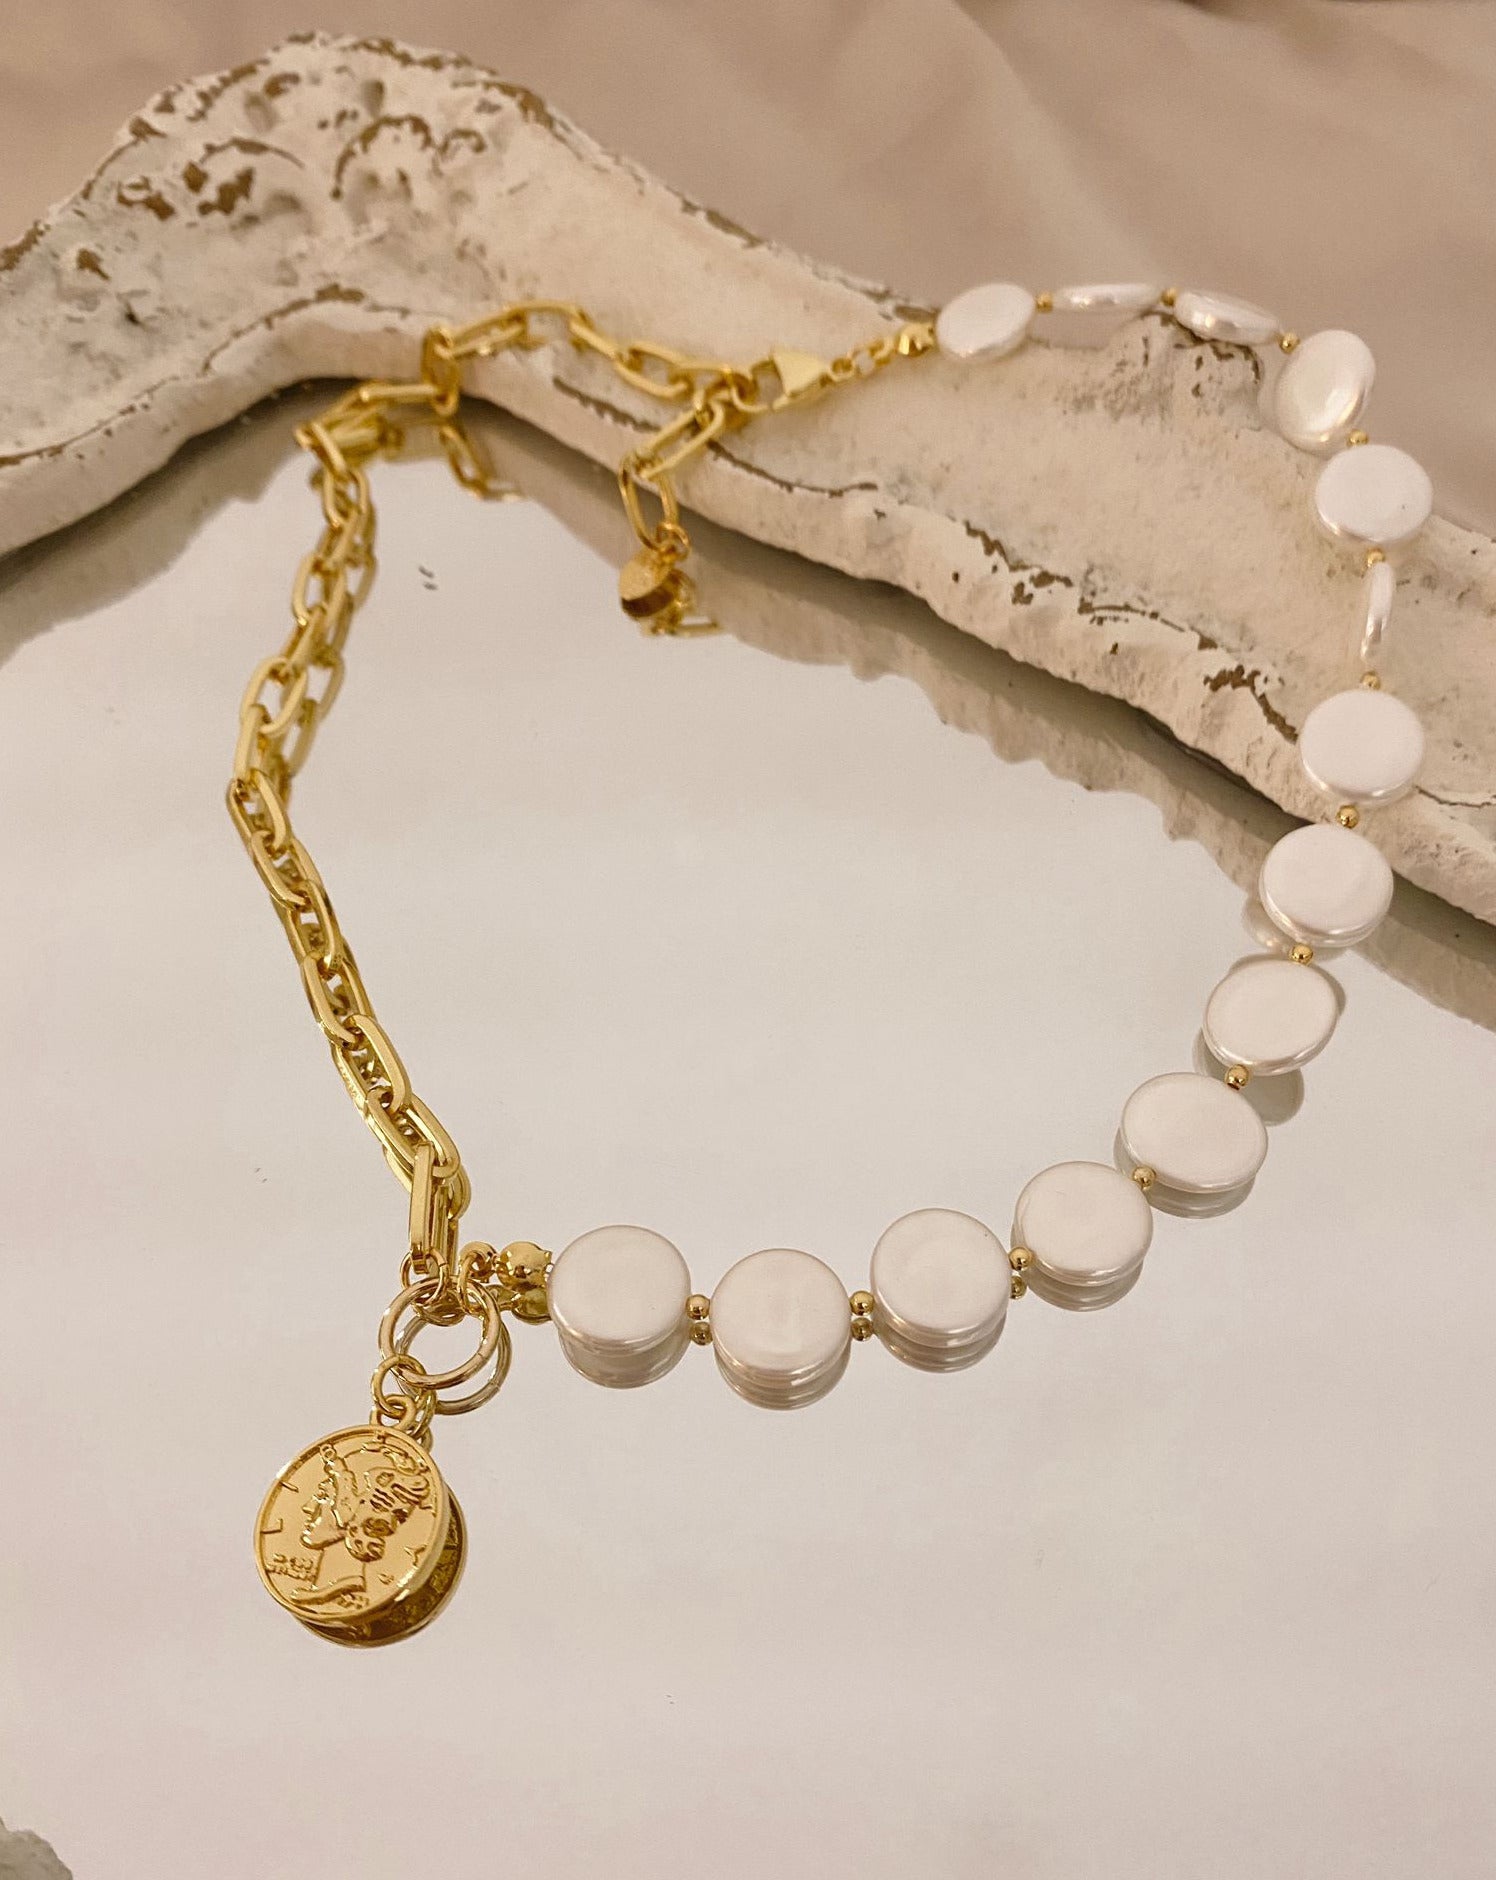 Gold Link Necklace with Half Pearls and Antique Medallion